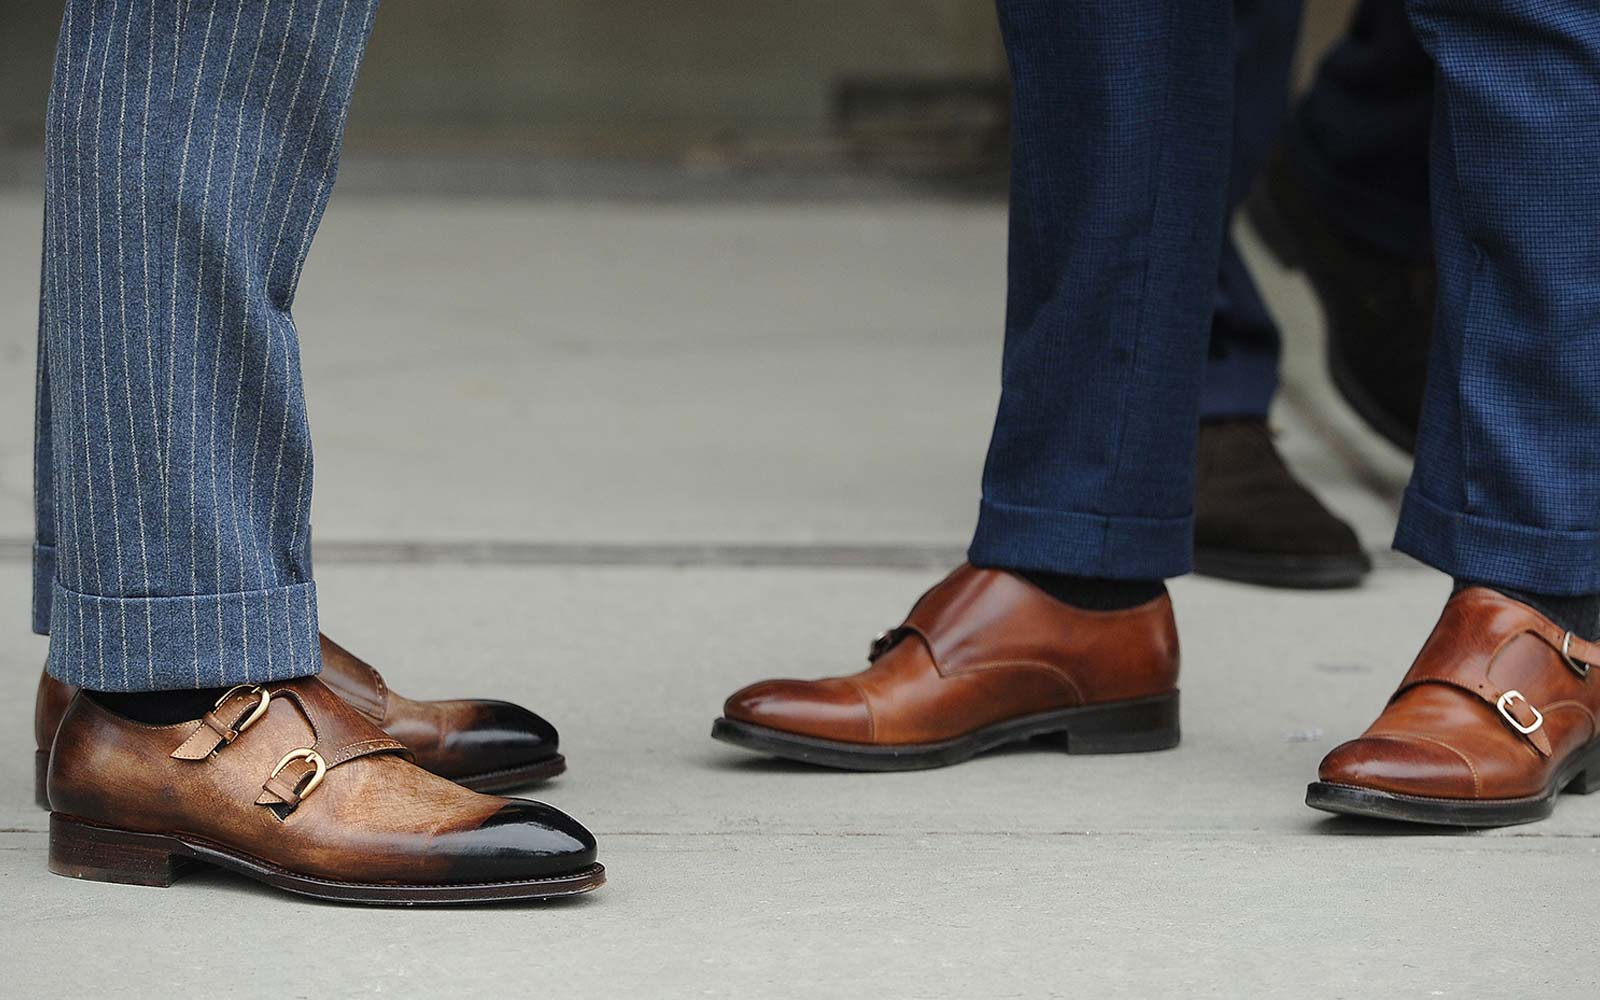 male pattern boldness: Men's pants length: how short is too short?